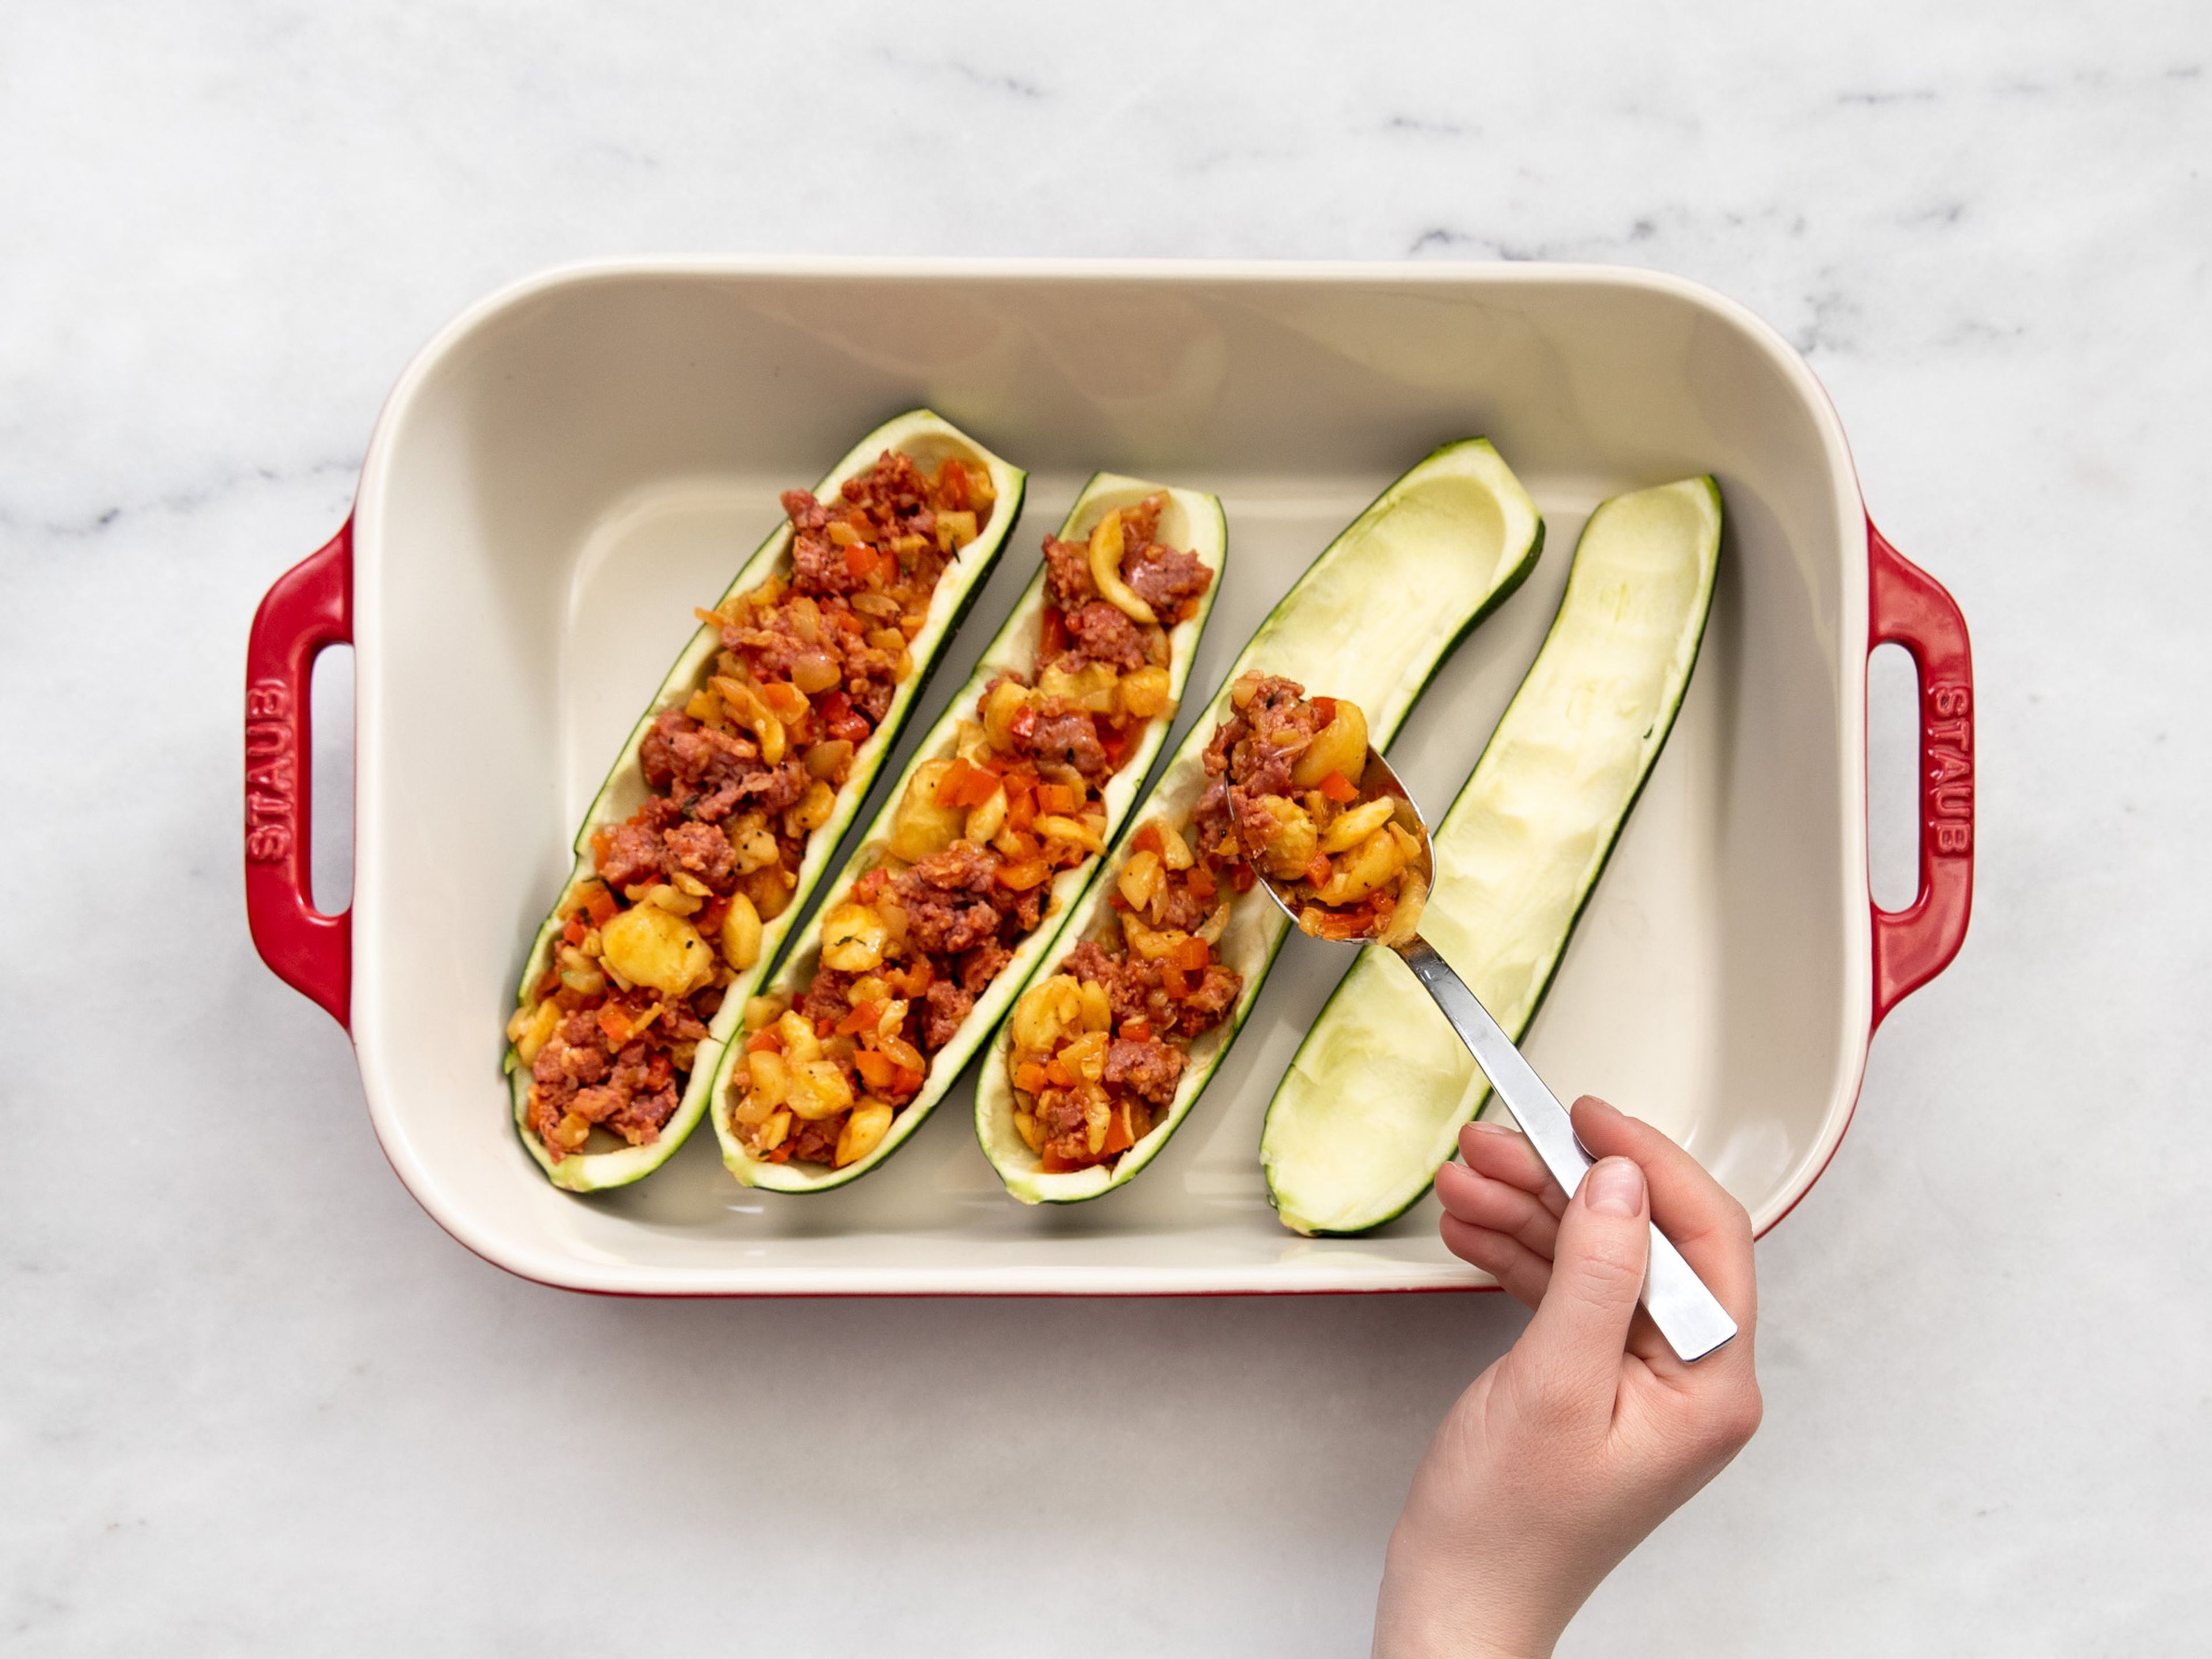 Place the zucchini in a baking dish and stuff them with the sausage and pepper filling. Generously sprinkle Parmesan breadcrumbs over the dish. Bake in the oven for approx. 25 min., or until the crust is golden brown and the zucchini is tender. Enjoy!